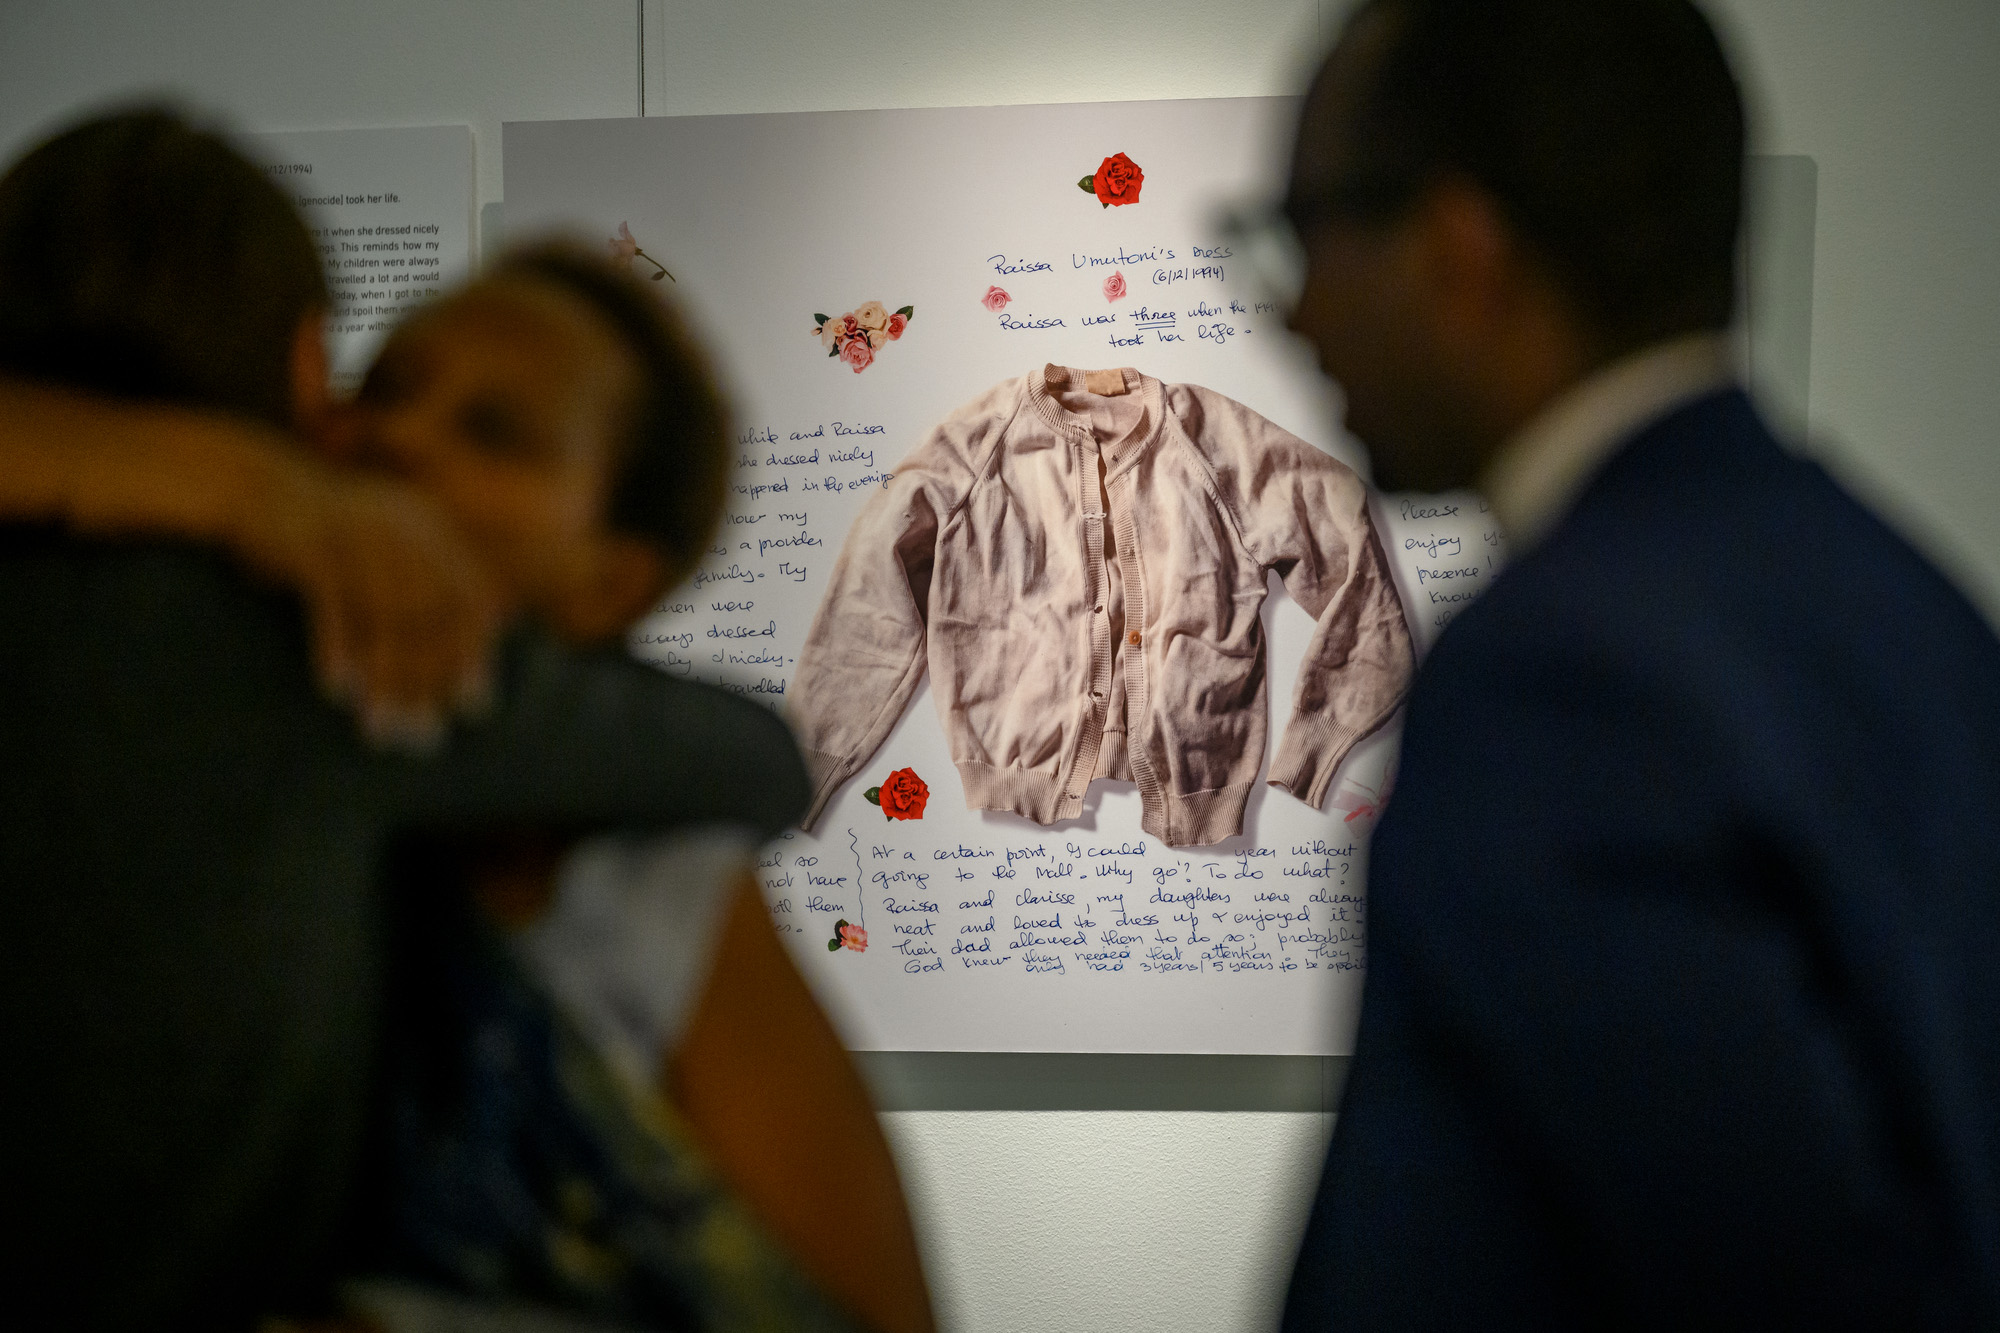 As part of an exhibit on genocide prevention, a framed shirt surrounded by text is shown in the background, while two people embracing in the foreground are blurred.